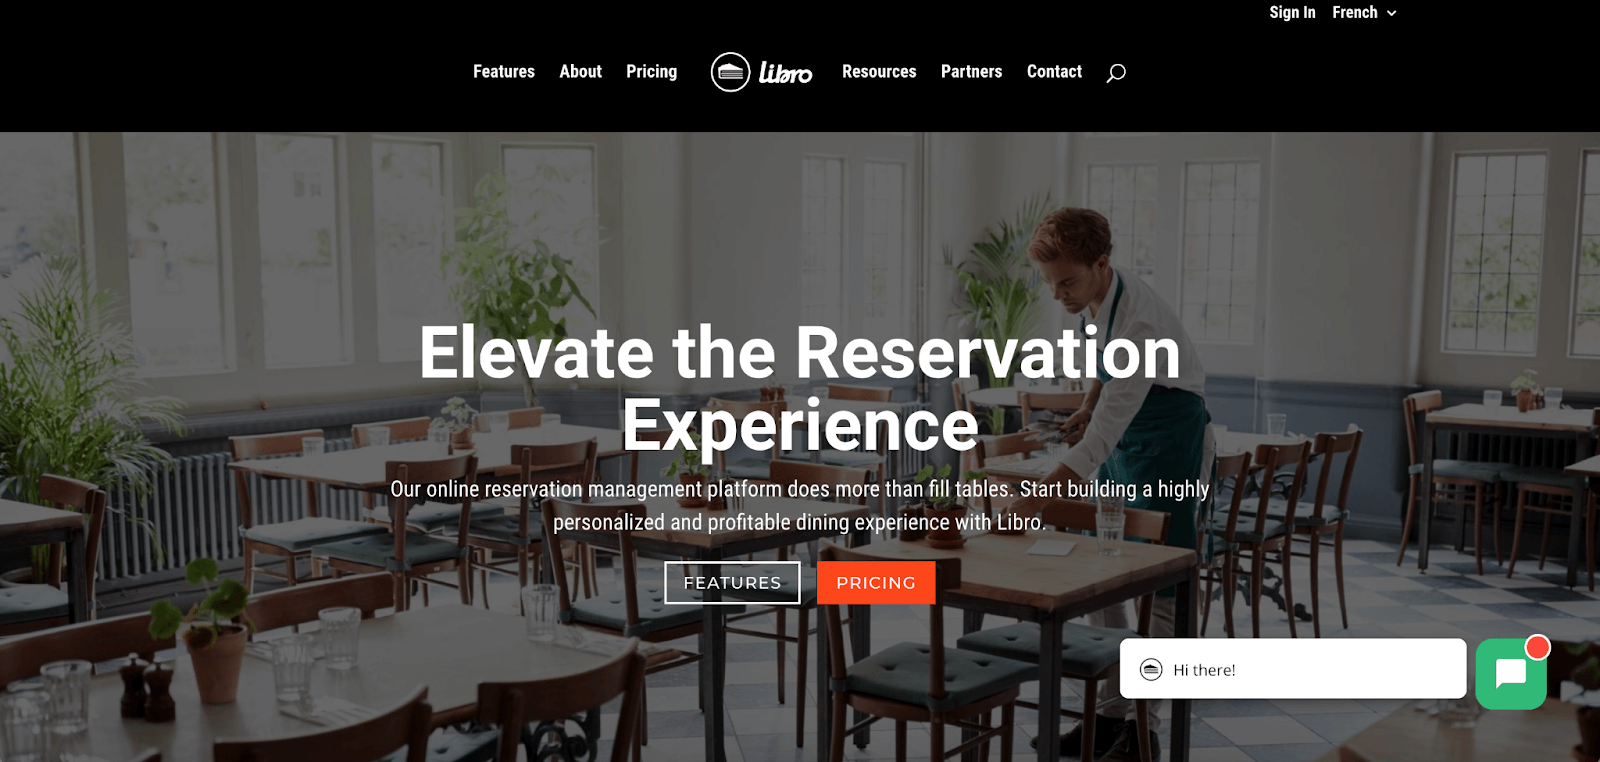 Develop a restaurant reservation system app like opentable by Harkirpanjit